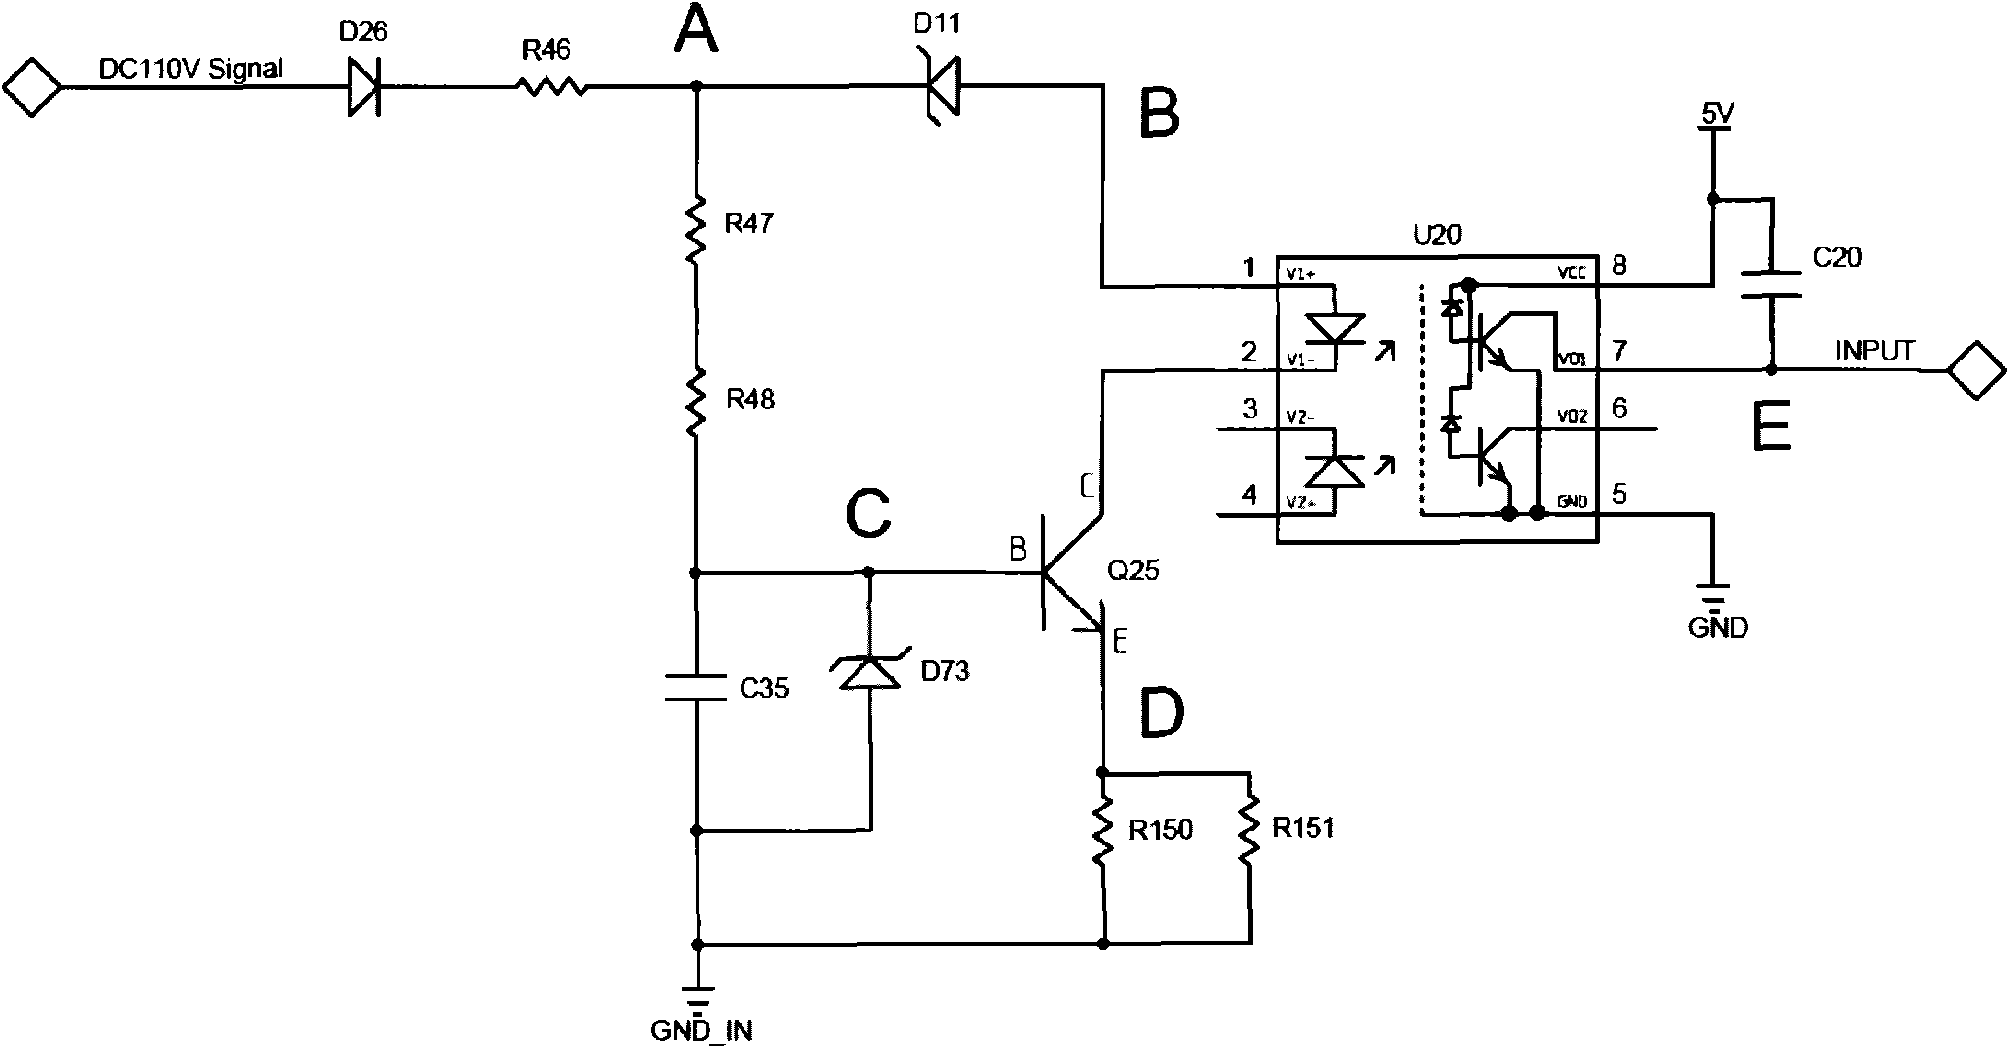 Air-conditioning controller for train environment